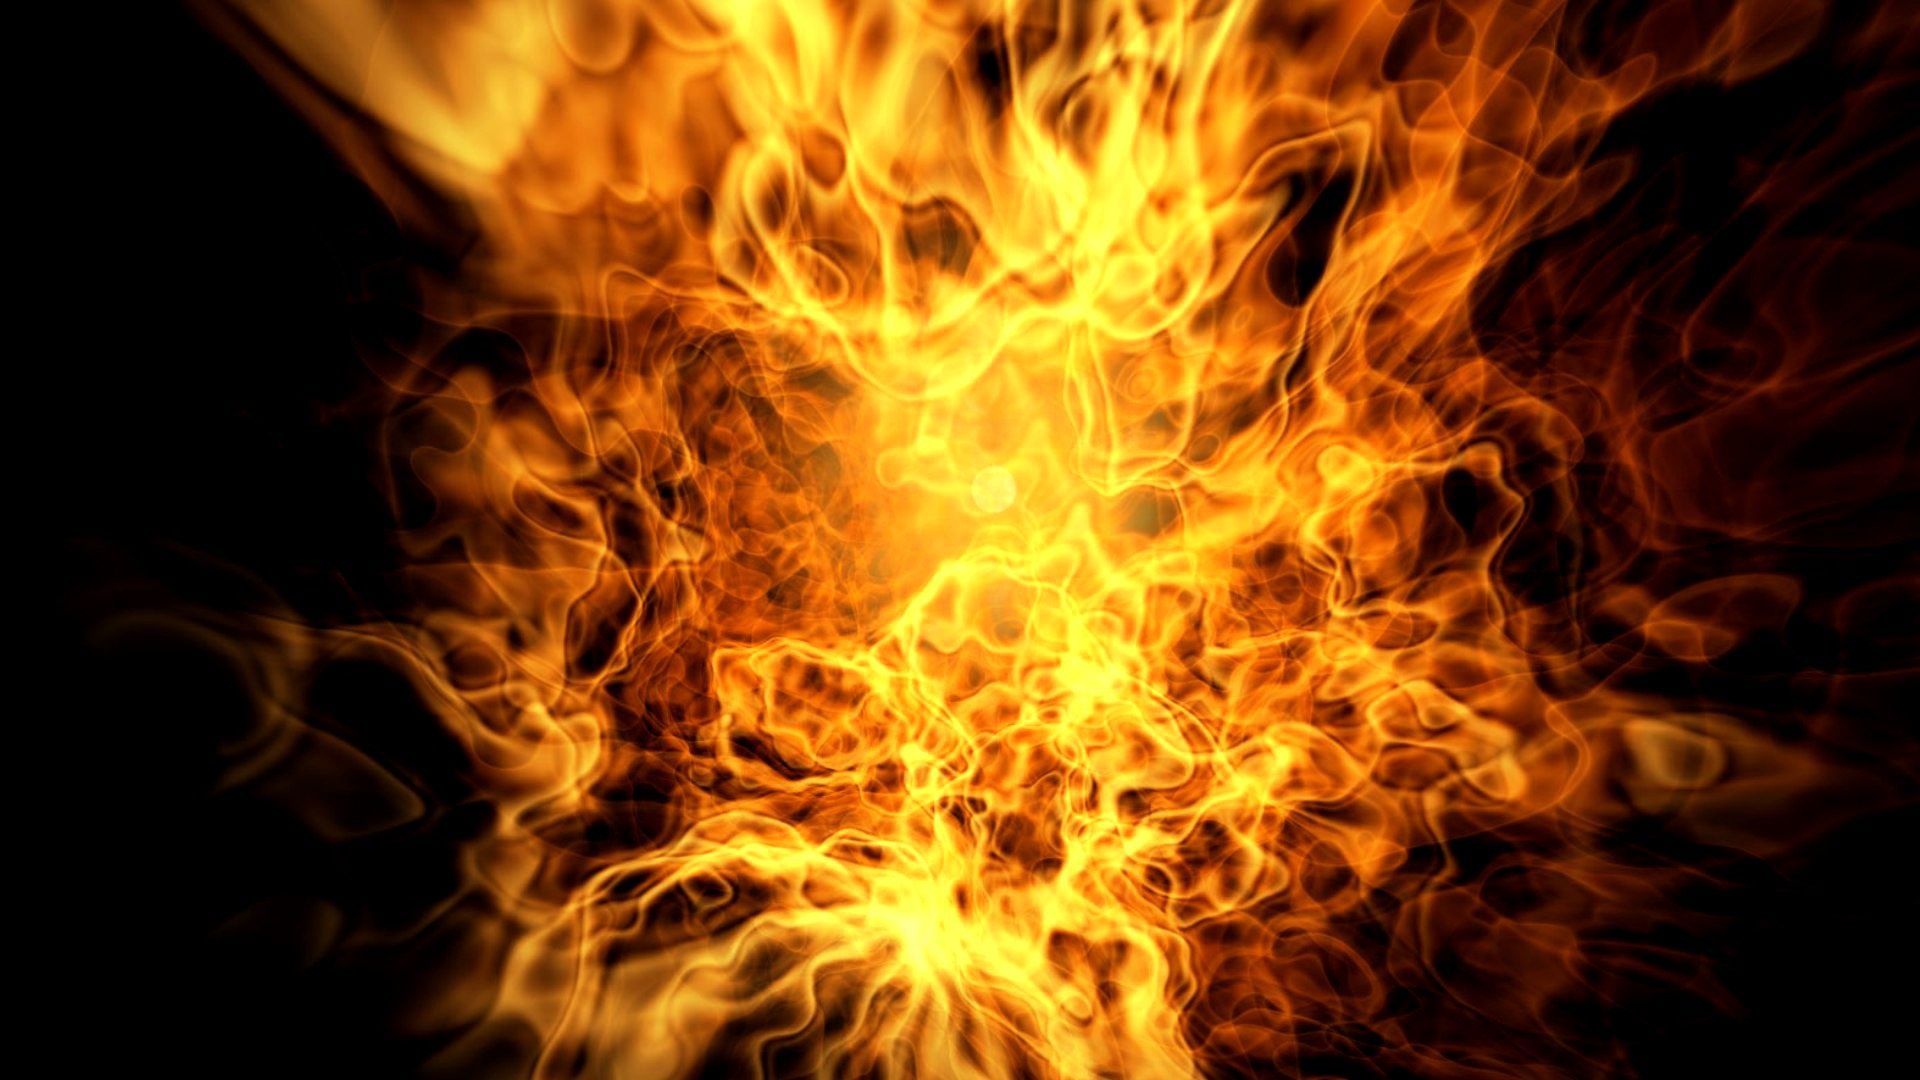 Flame Hd Wallpapers Hd Backgrounds